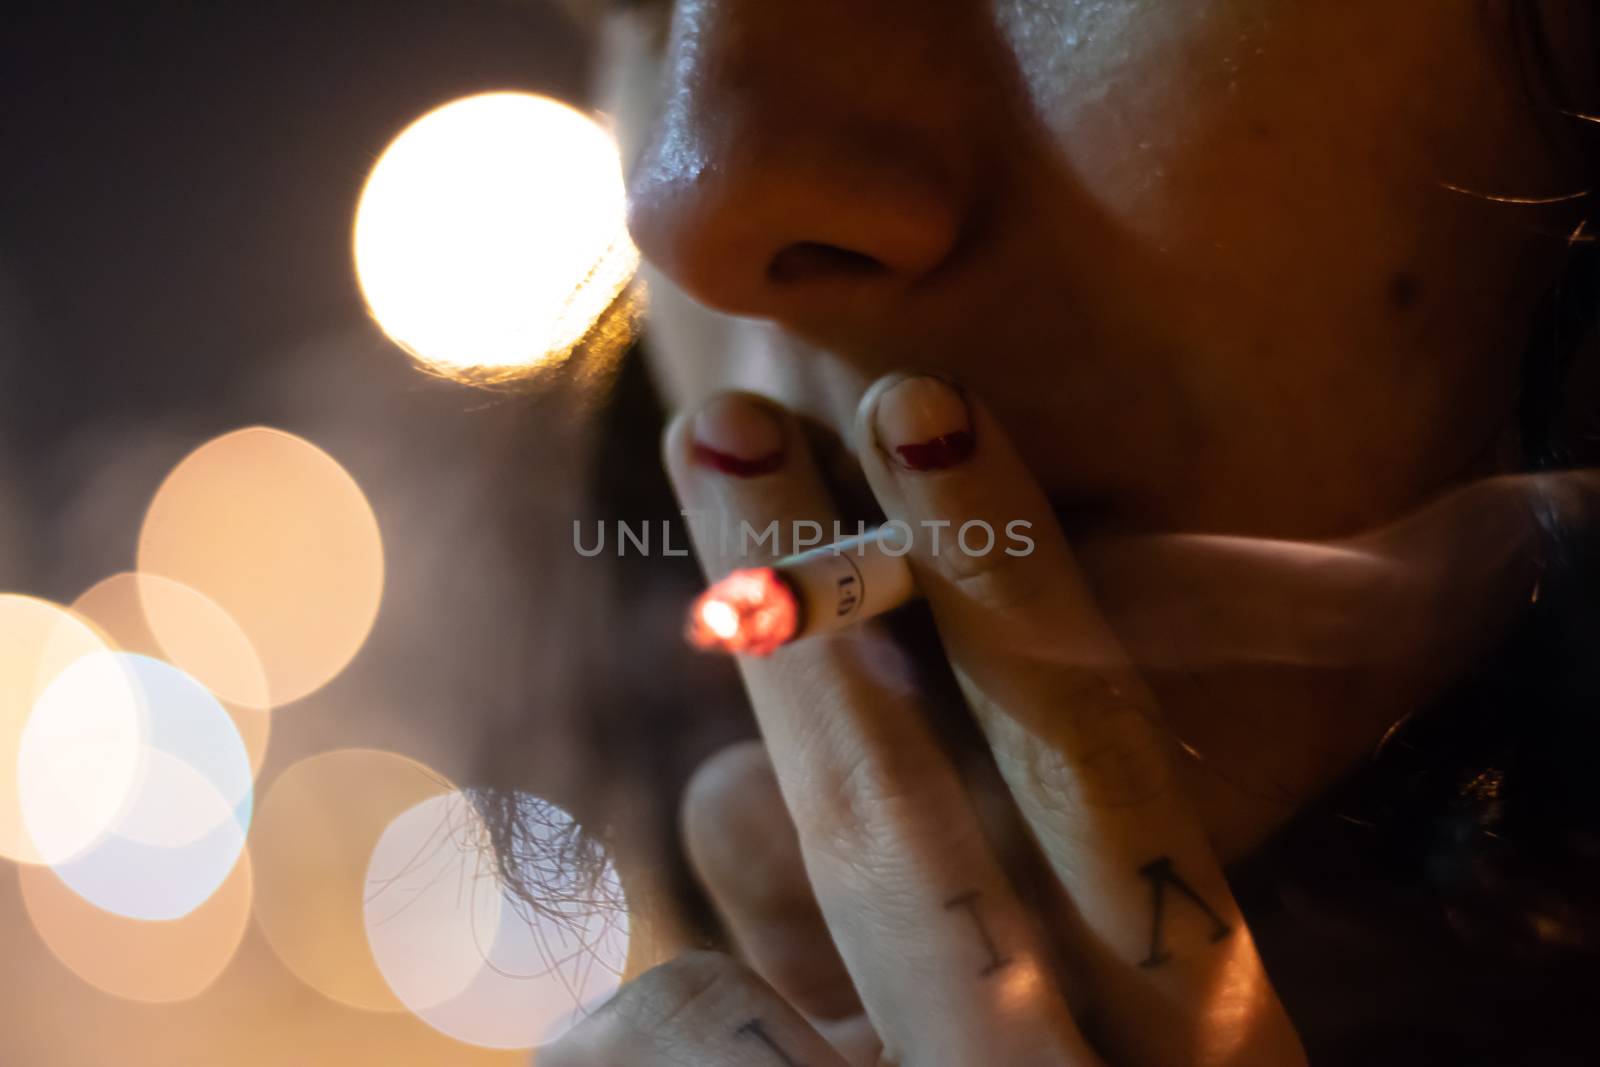 a girl smoking a cigarette with rubbed out red nail polish. background is blurry.